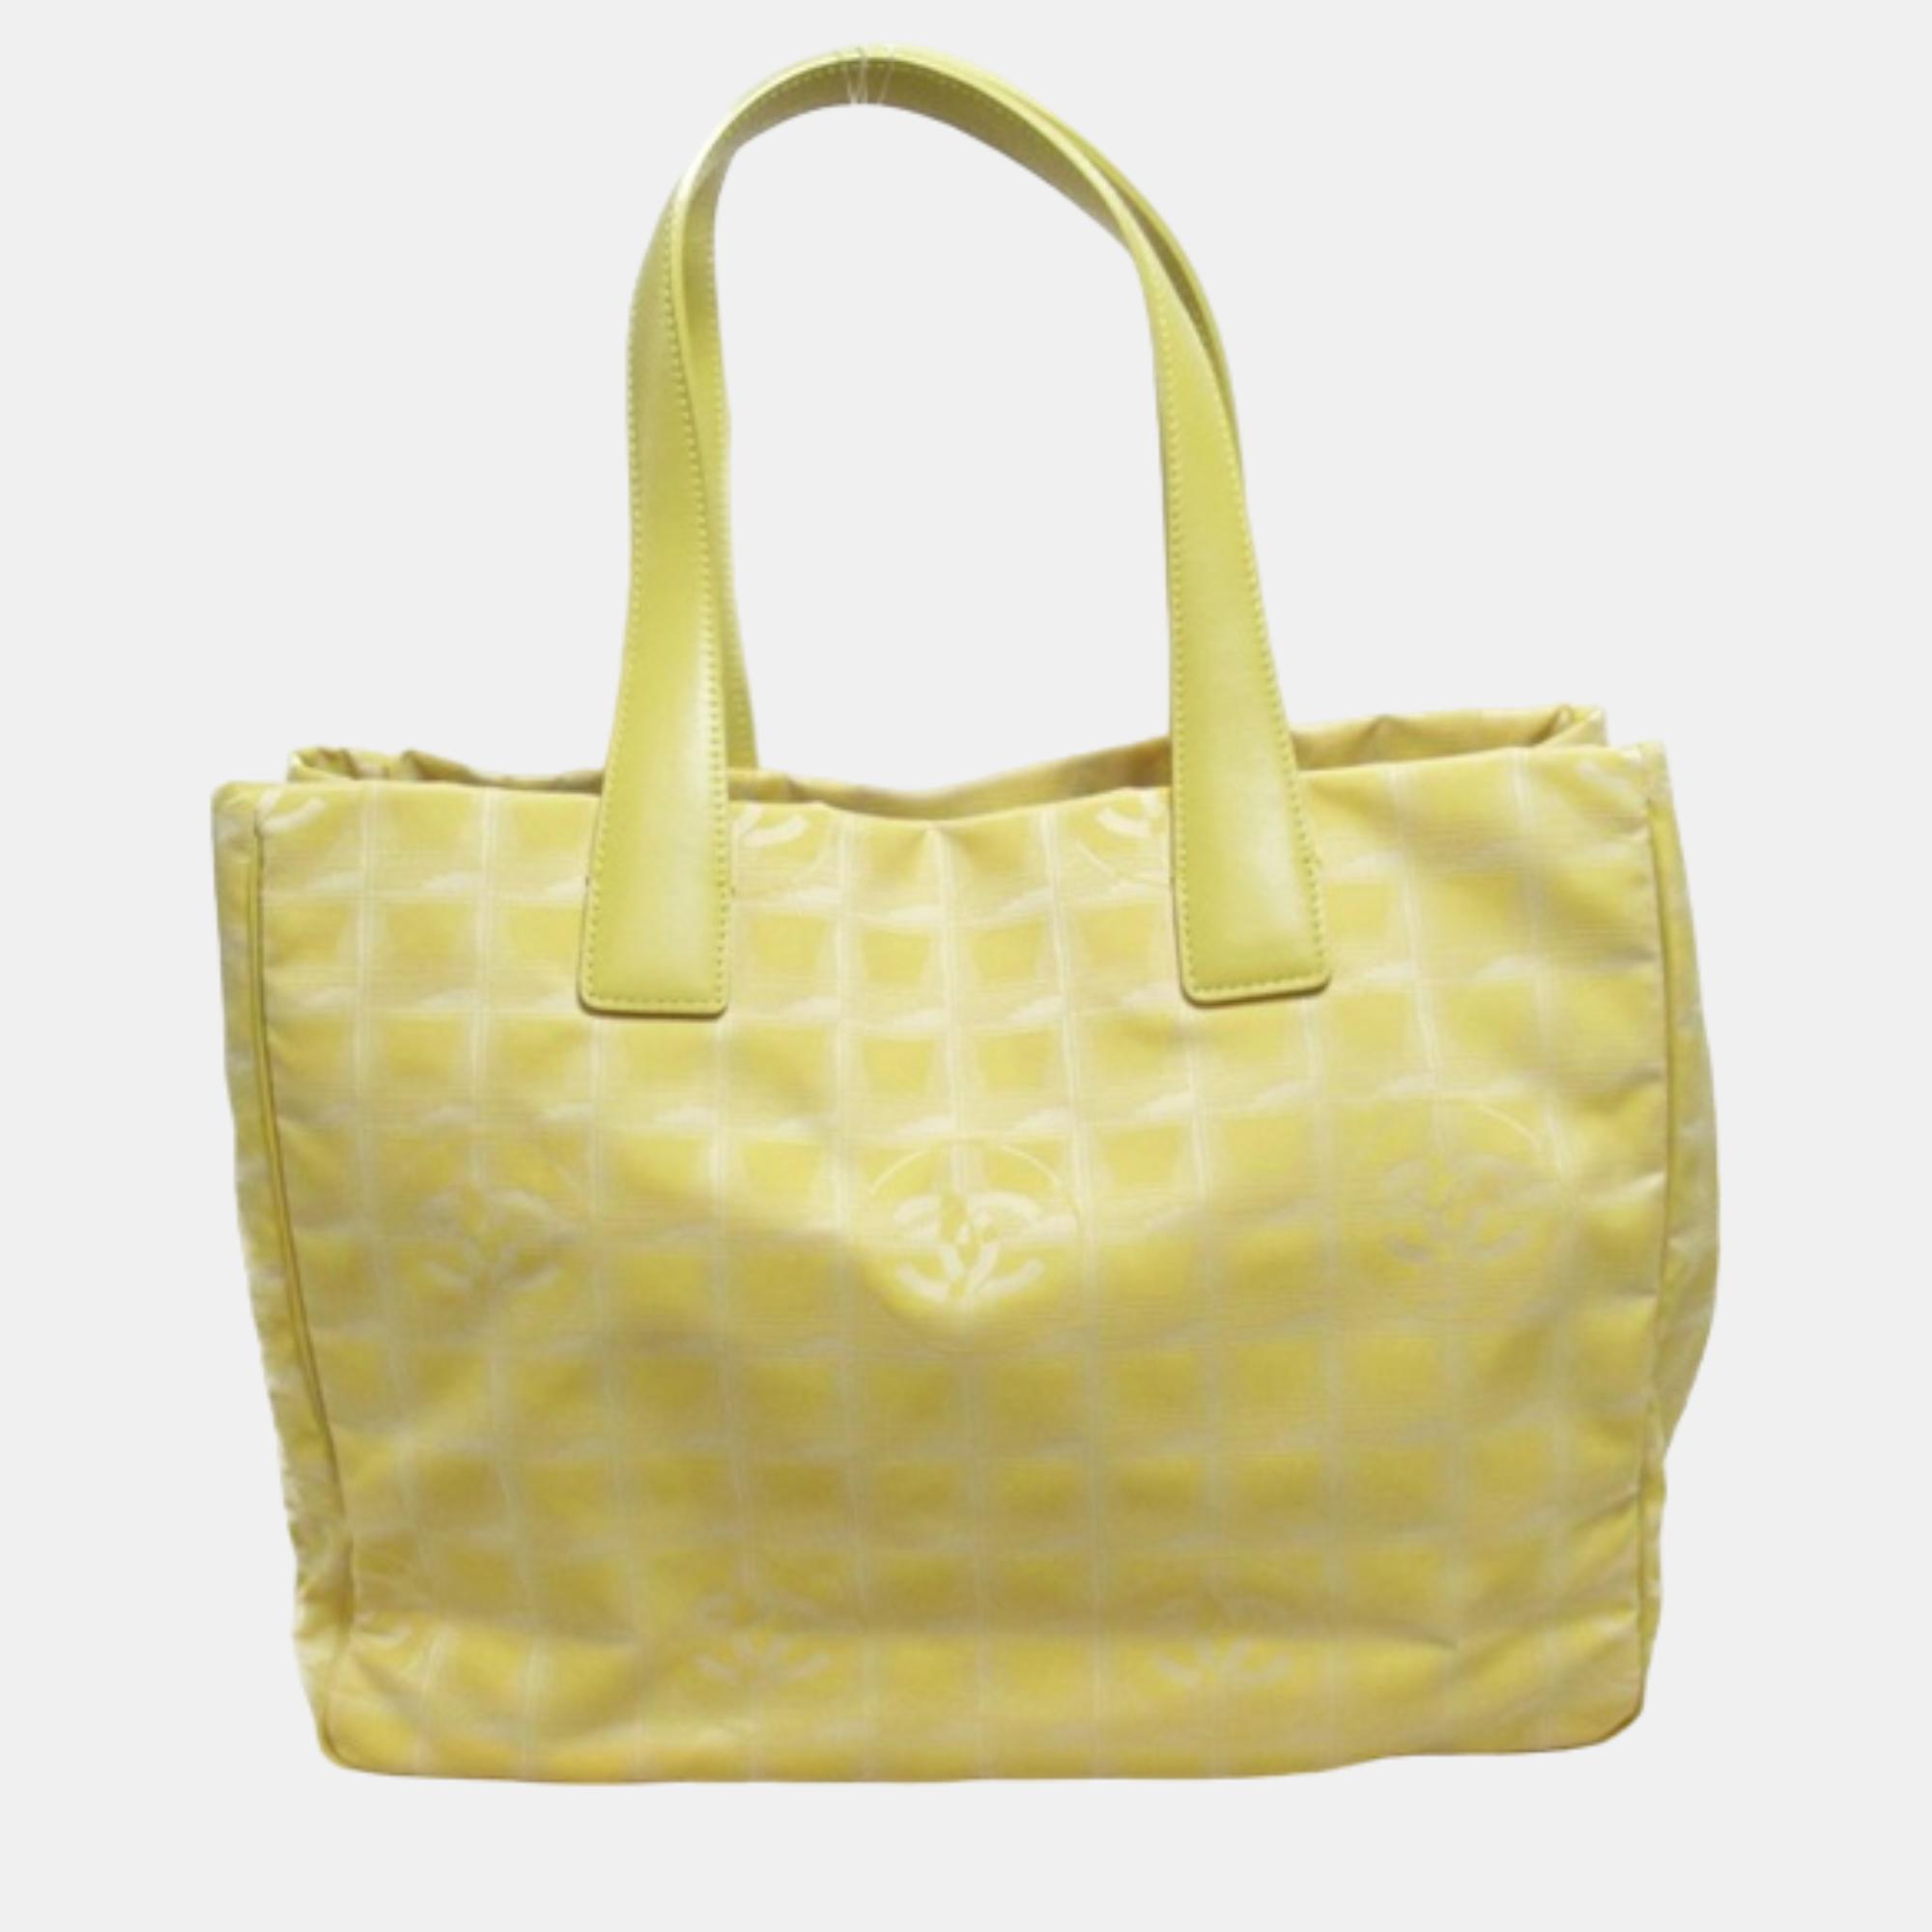 Chanel Yellow Canvas New Travel Line Tote Bag Tote Bag